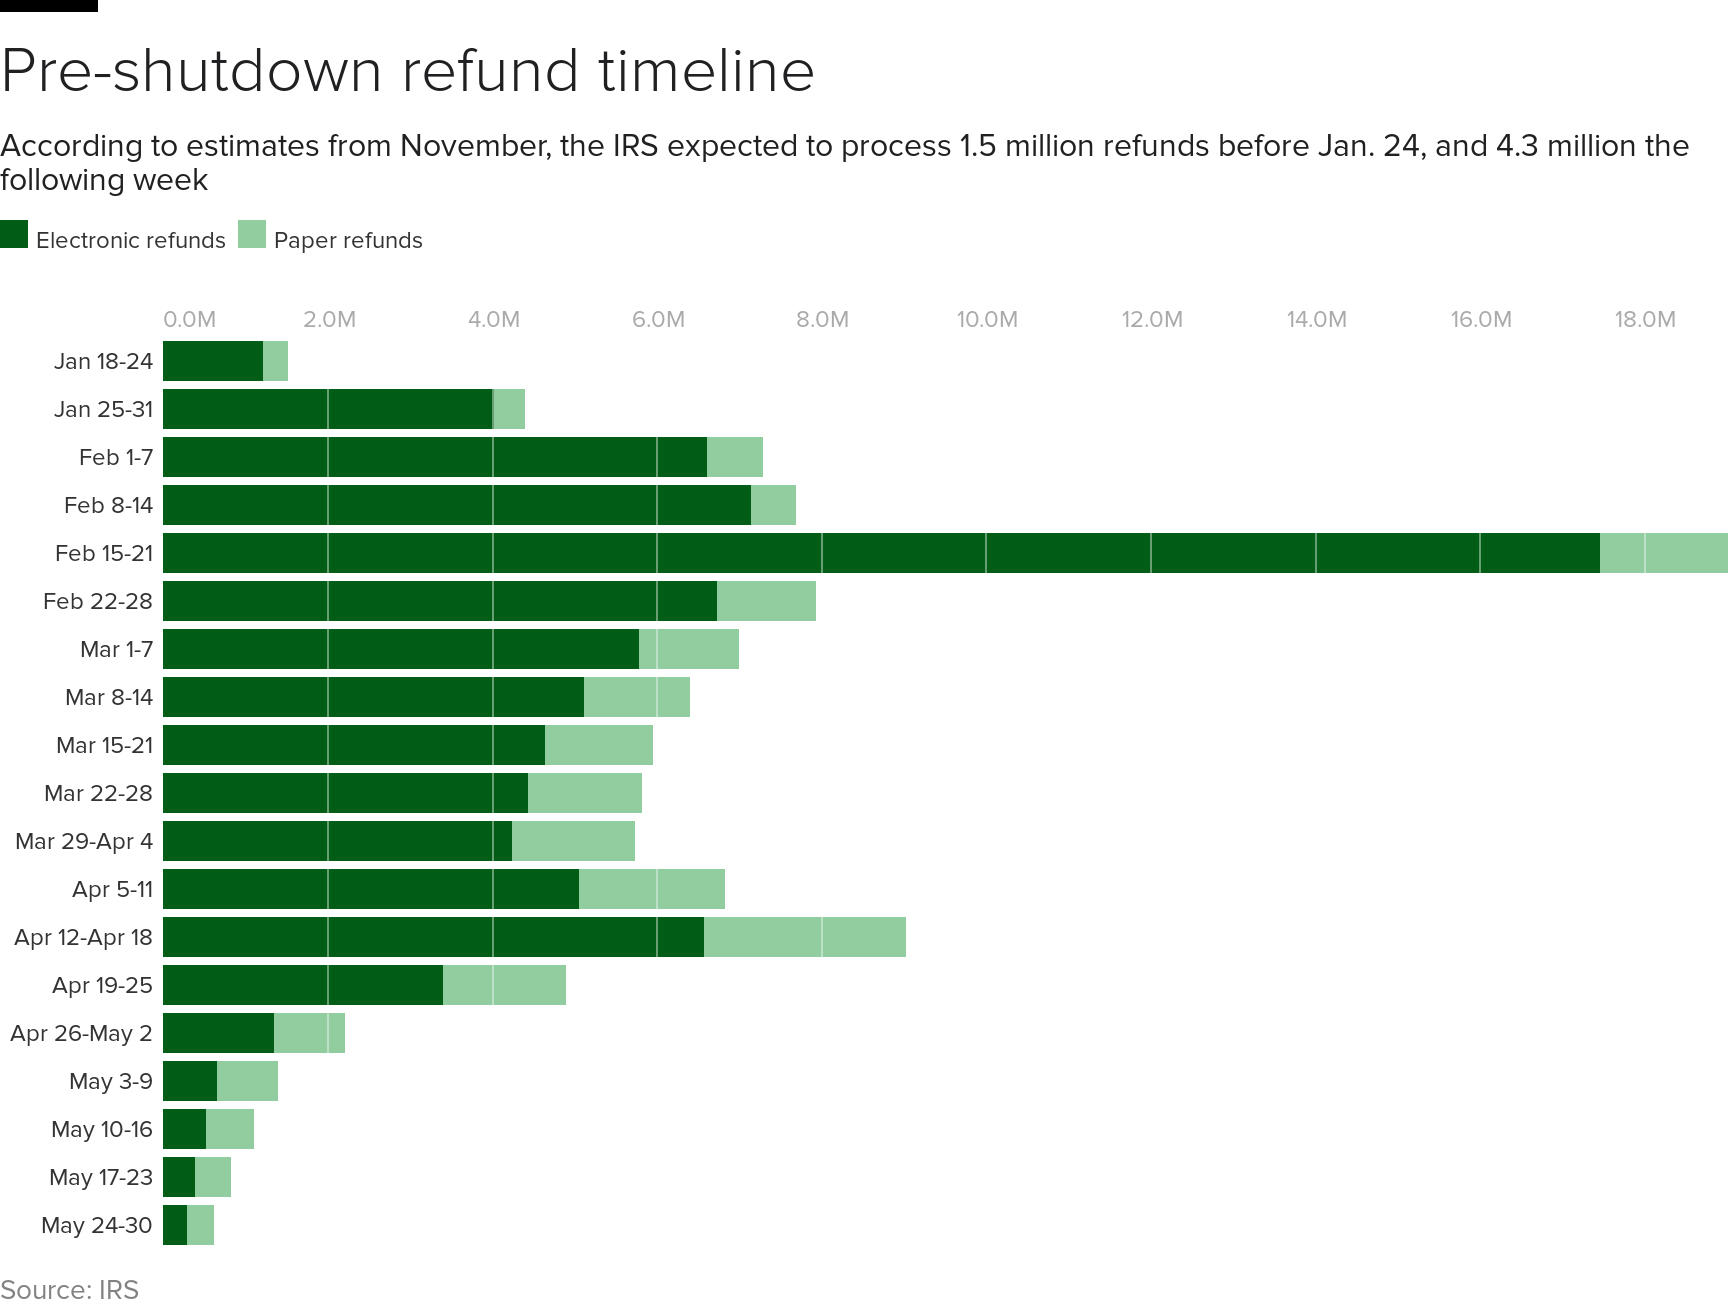 irs-refund-projections.jpg 